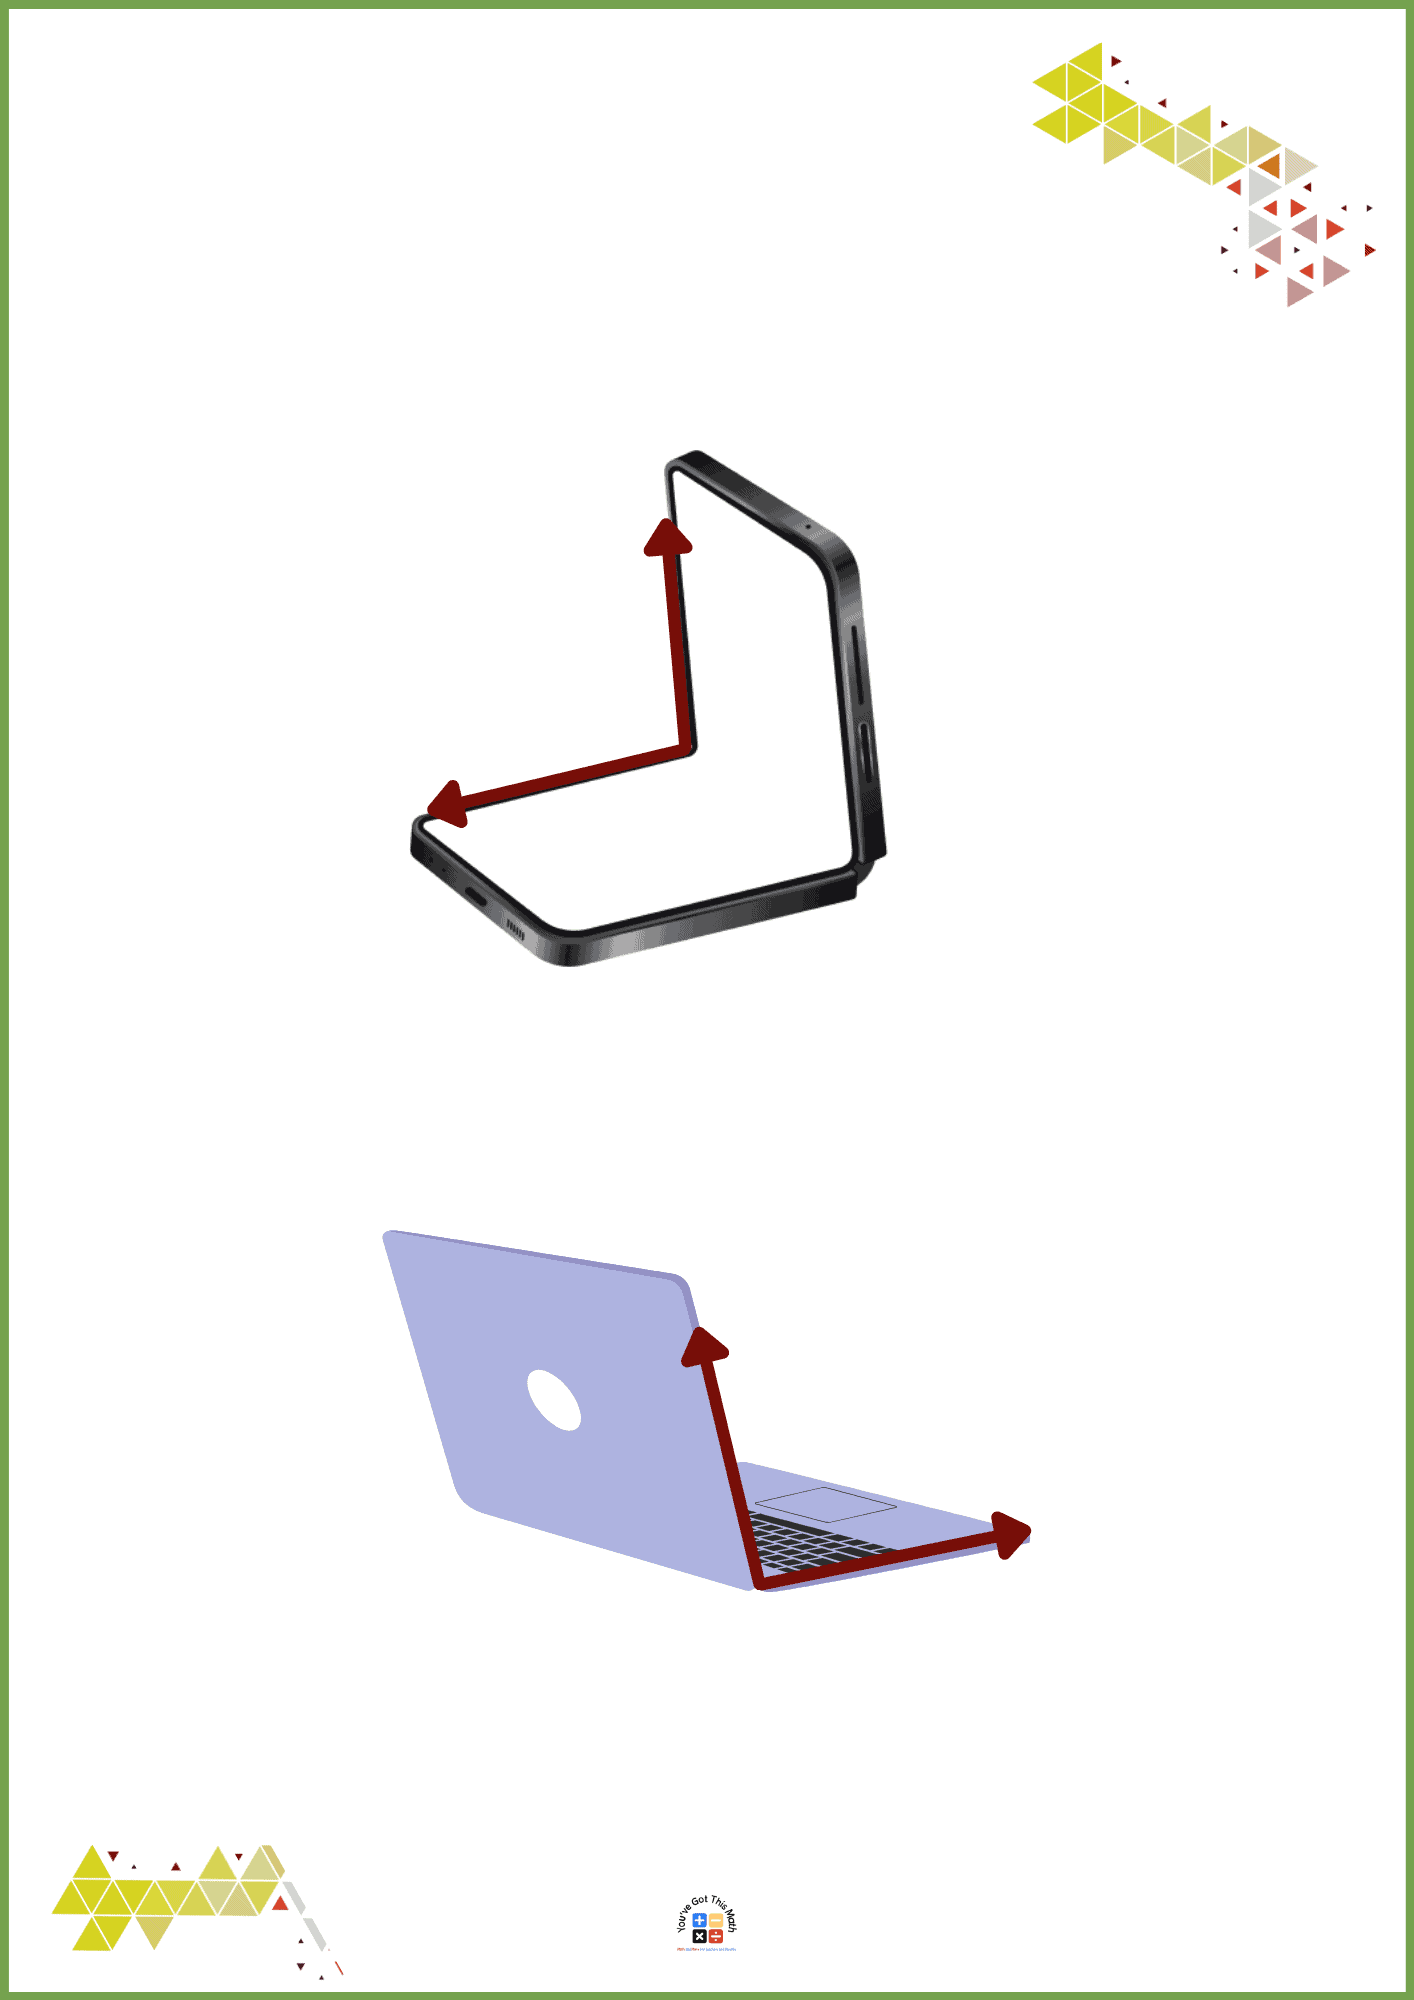 Mobile and Laptop Opened in Acute Angle Position